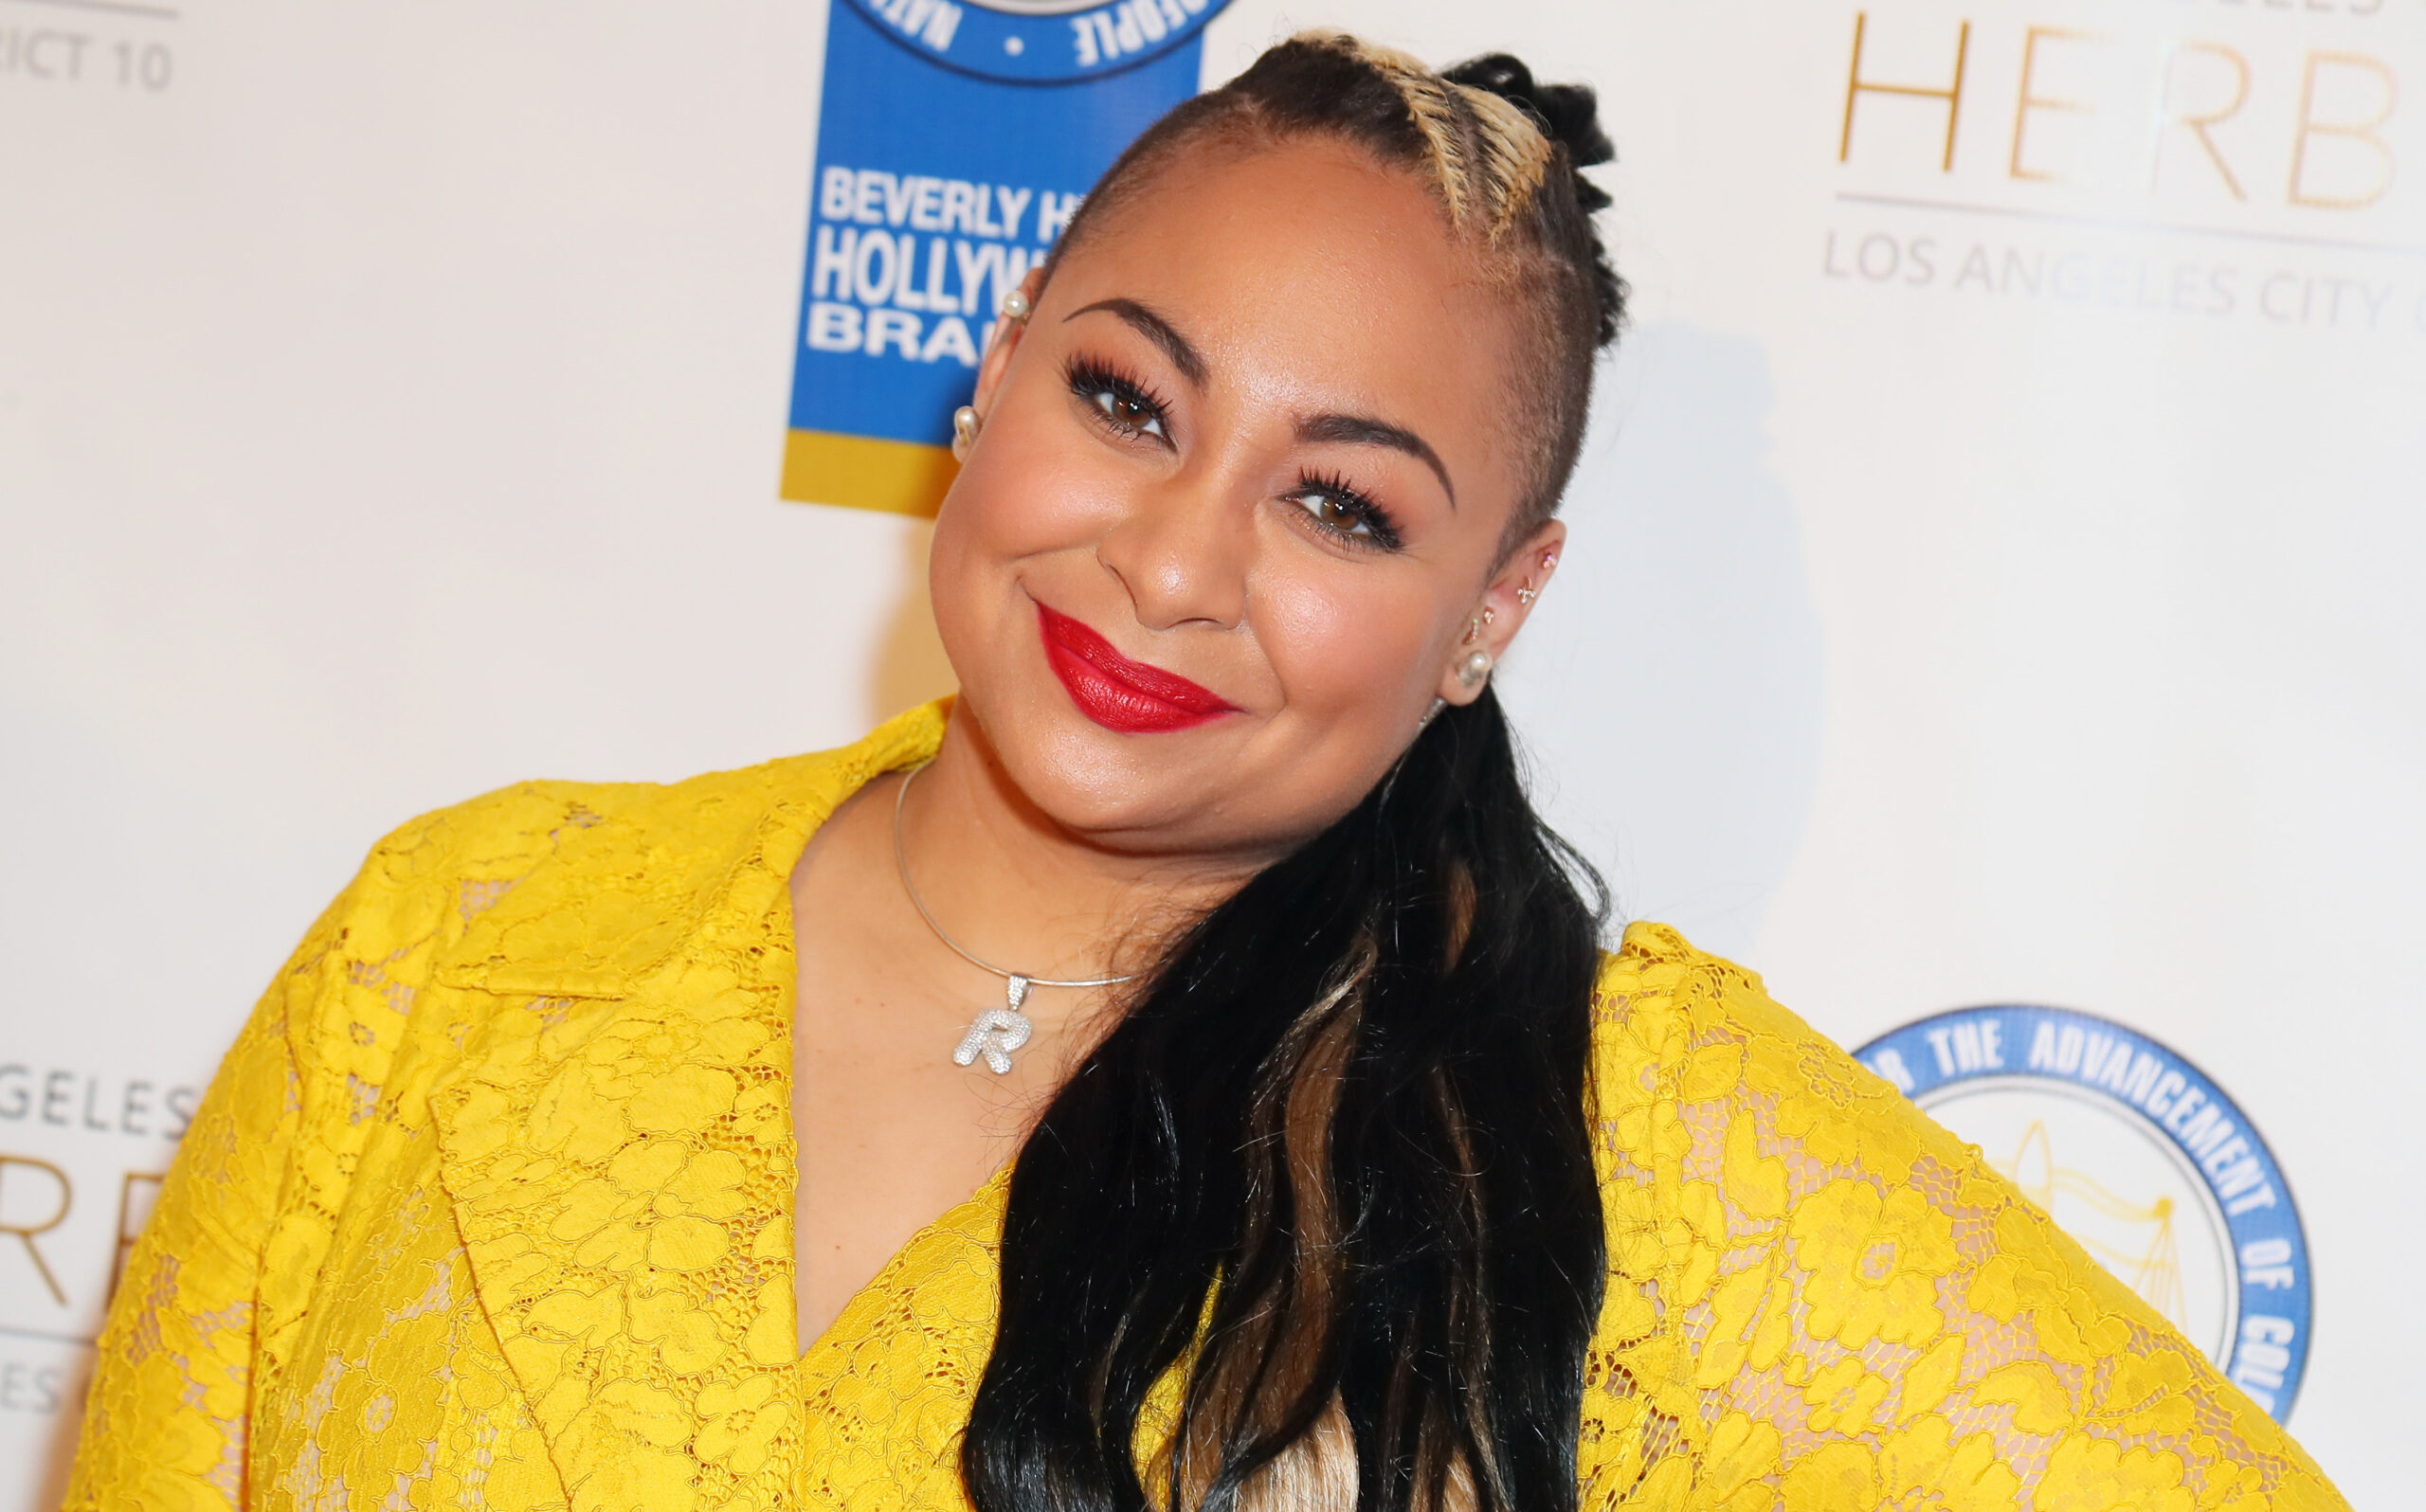 Disney star Raven-Symoné claims to have psychic moments like her character on her popular show.